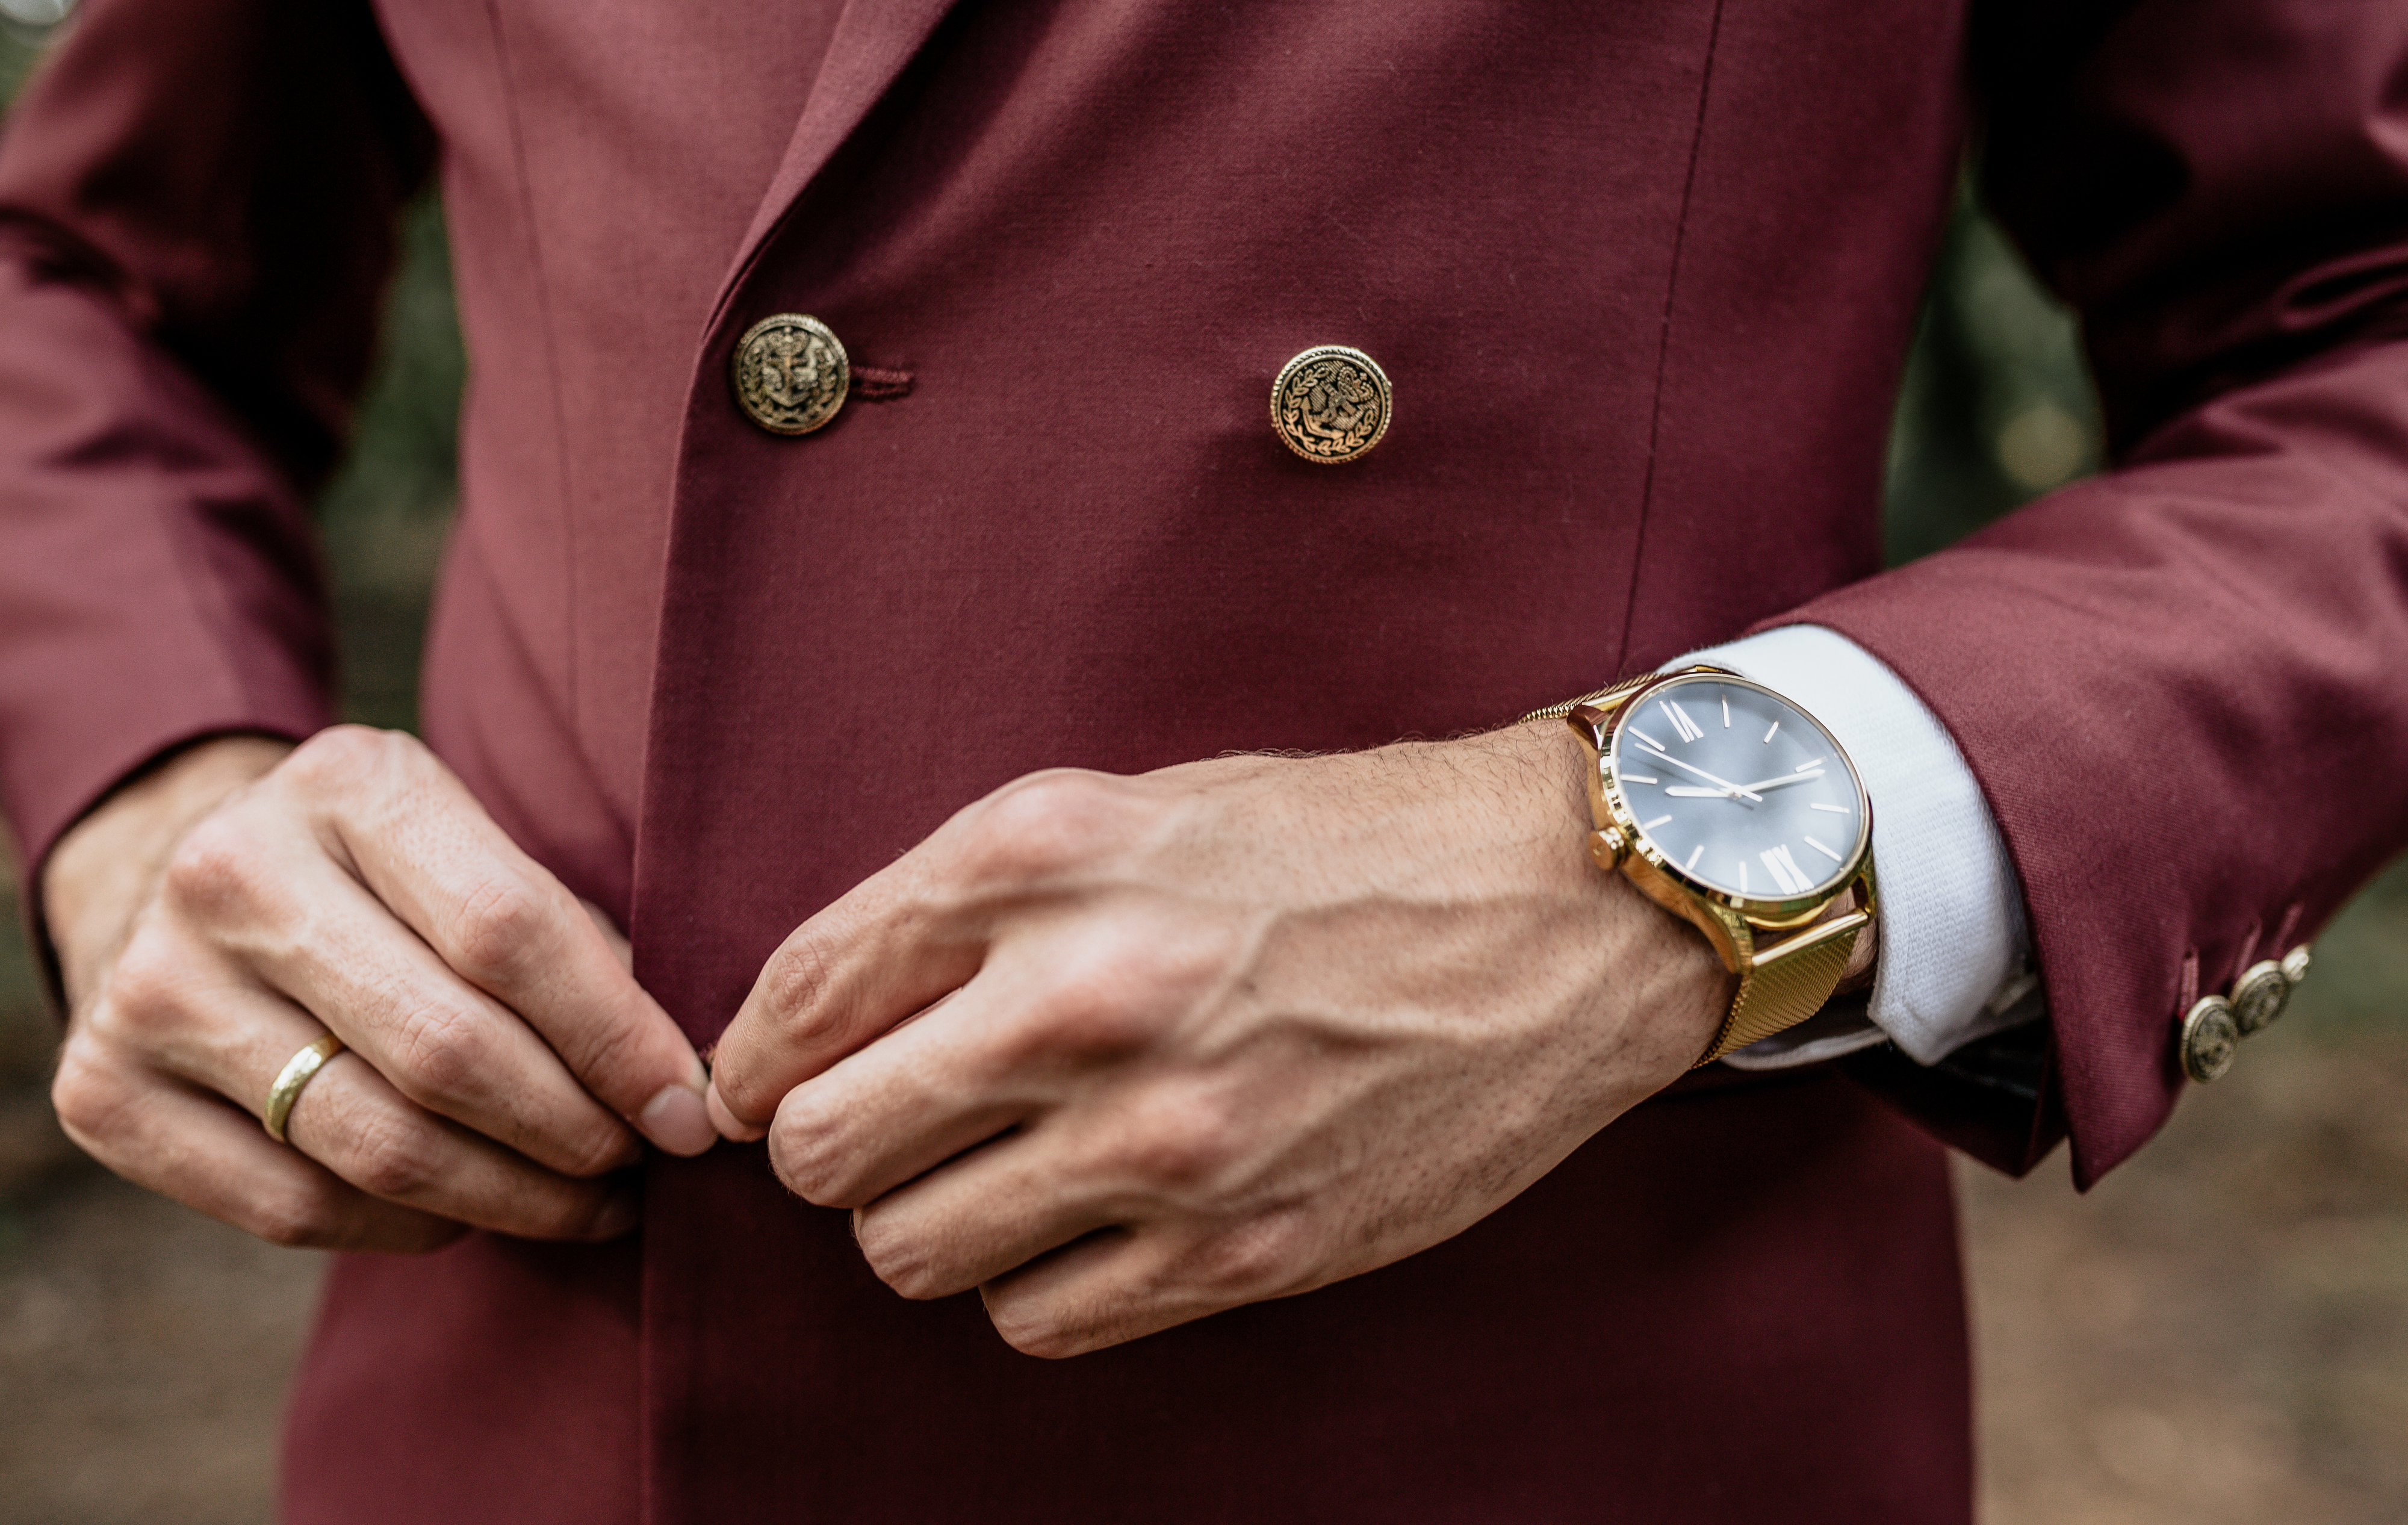 A man buttoning his jacket while wearing an expensive watch